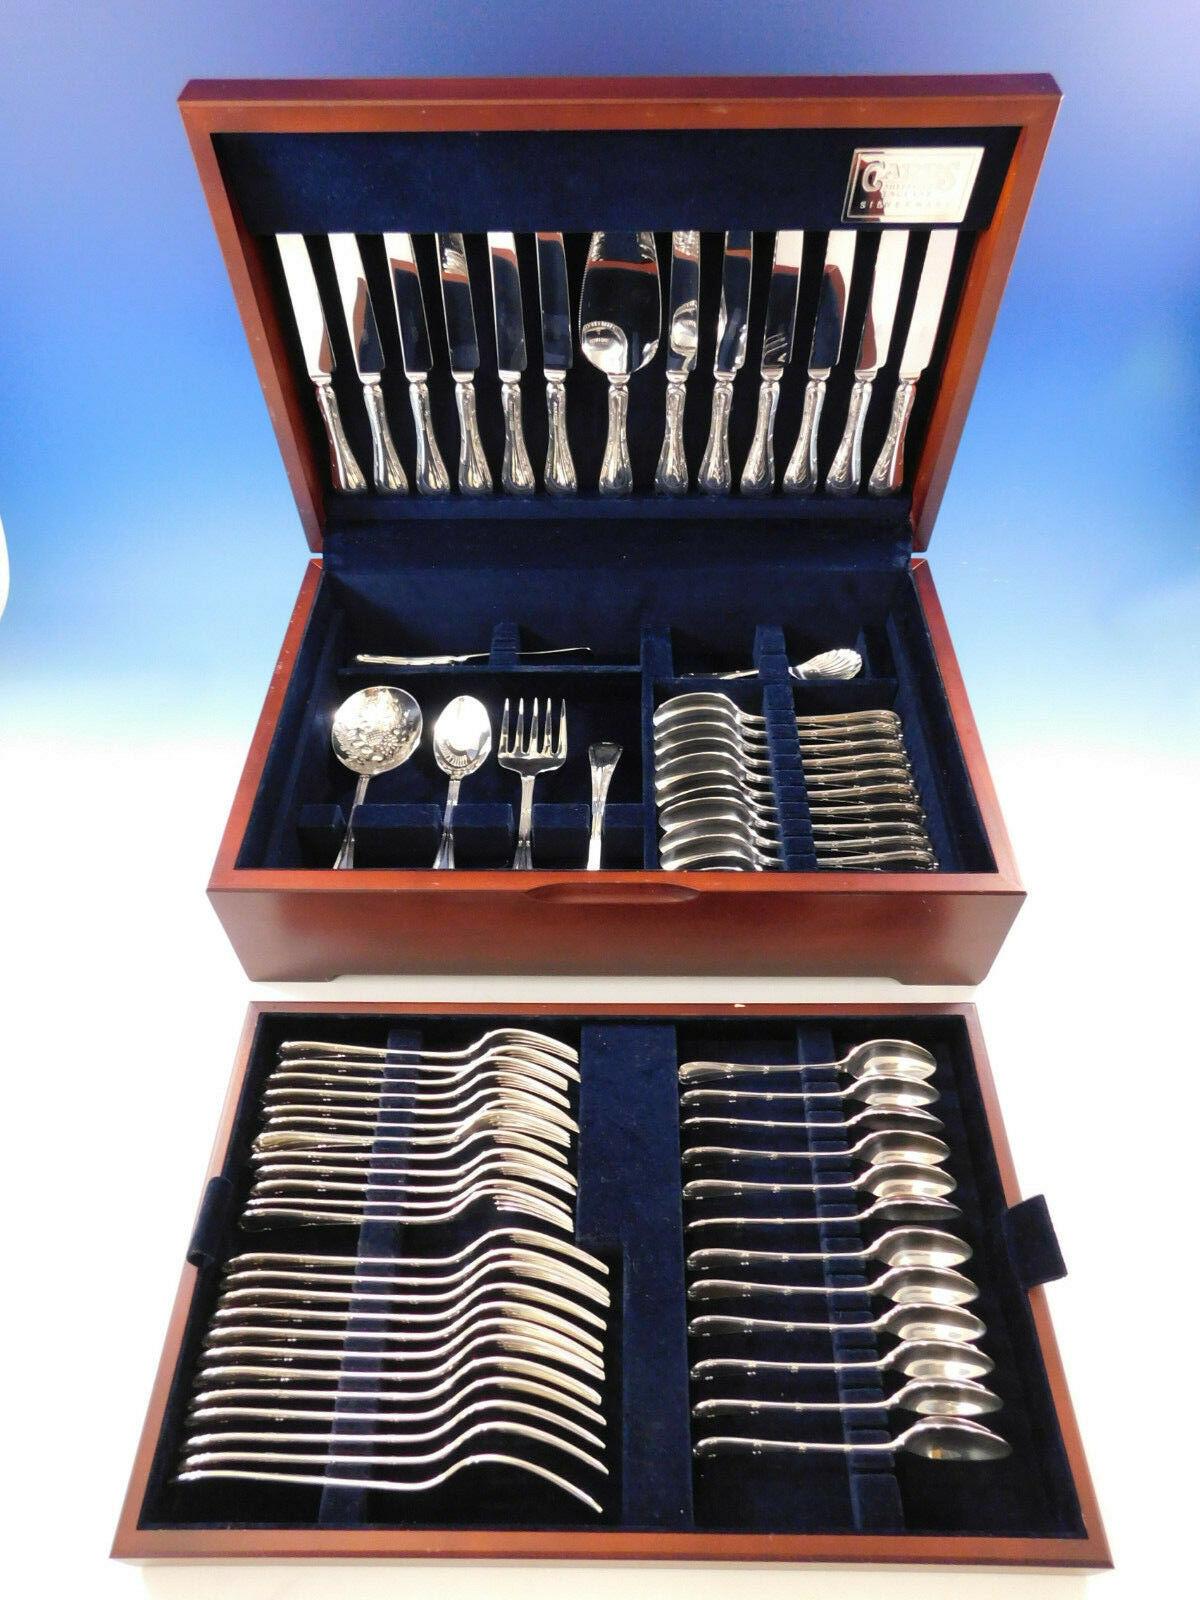 Superb unused dinner size Reed & Ribbon by Carrs England sterling silver flatware set, 67 pieces. Accented with a double reed, ribbon border and bow detail, this pattern displays classic elegance. This set includes:

12 dinner size knives, 10